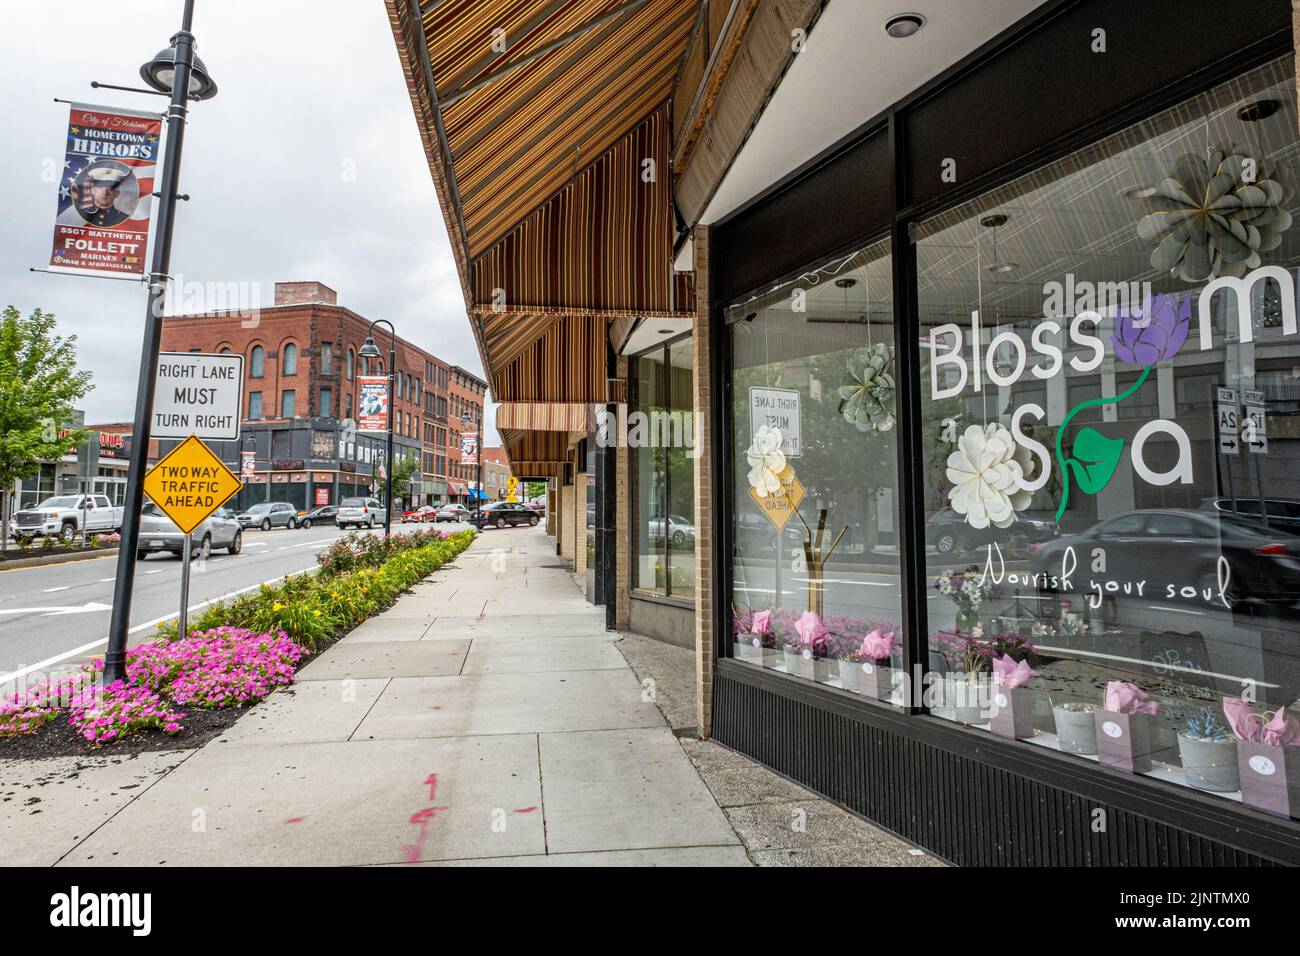 Buildings in downtown Fitchburg, Massachusetts - Blossom Spa, Main Street Stock Photo